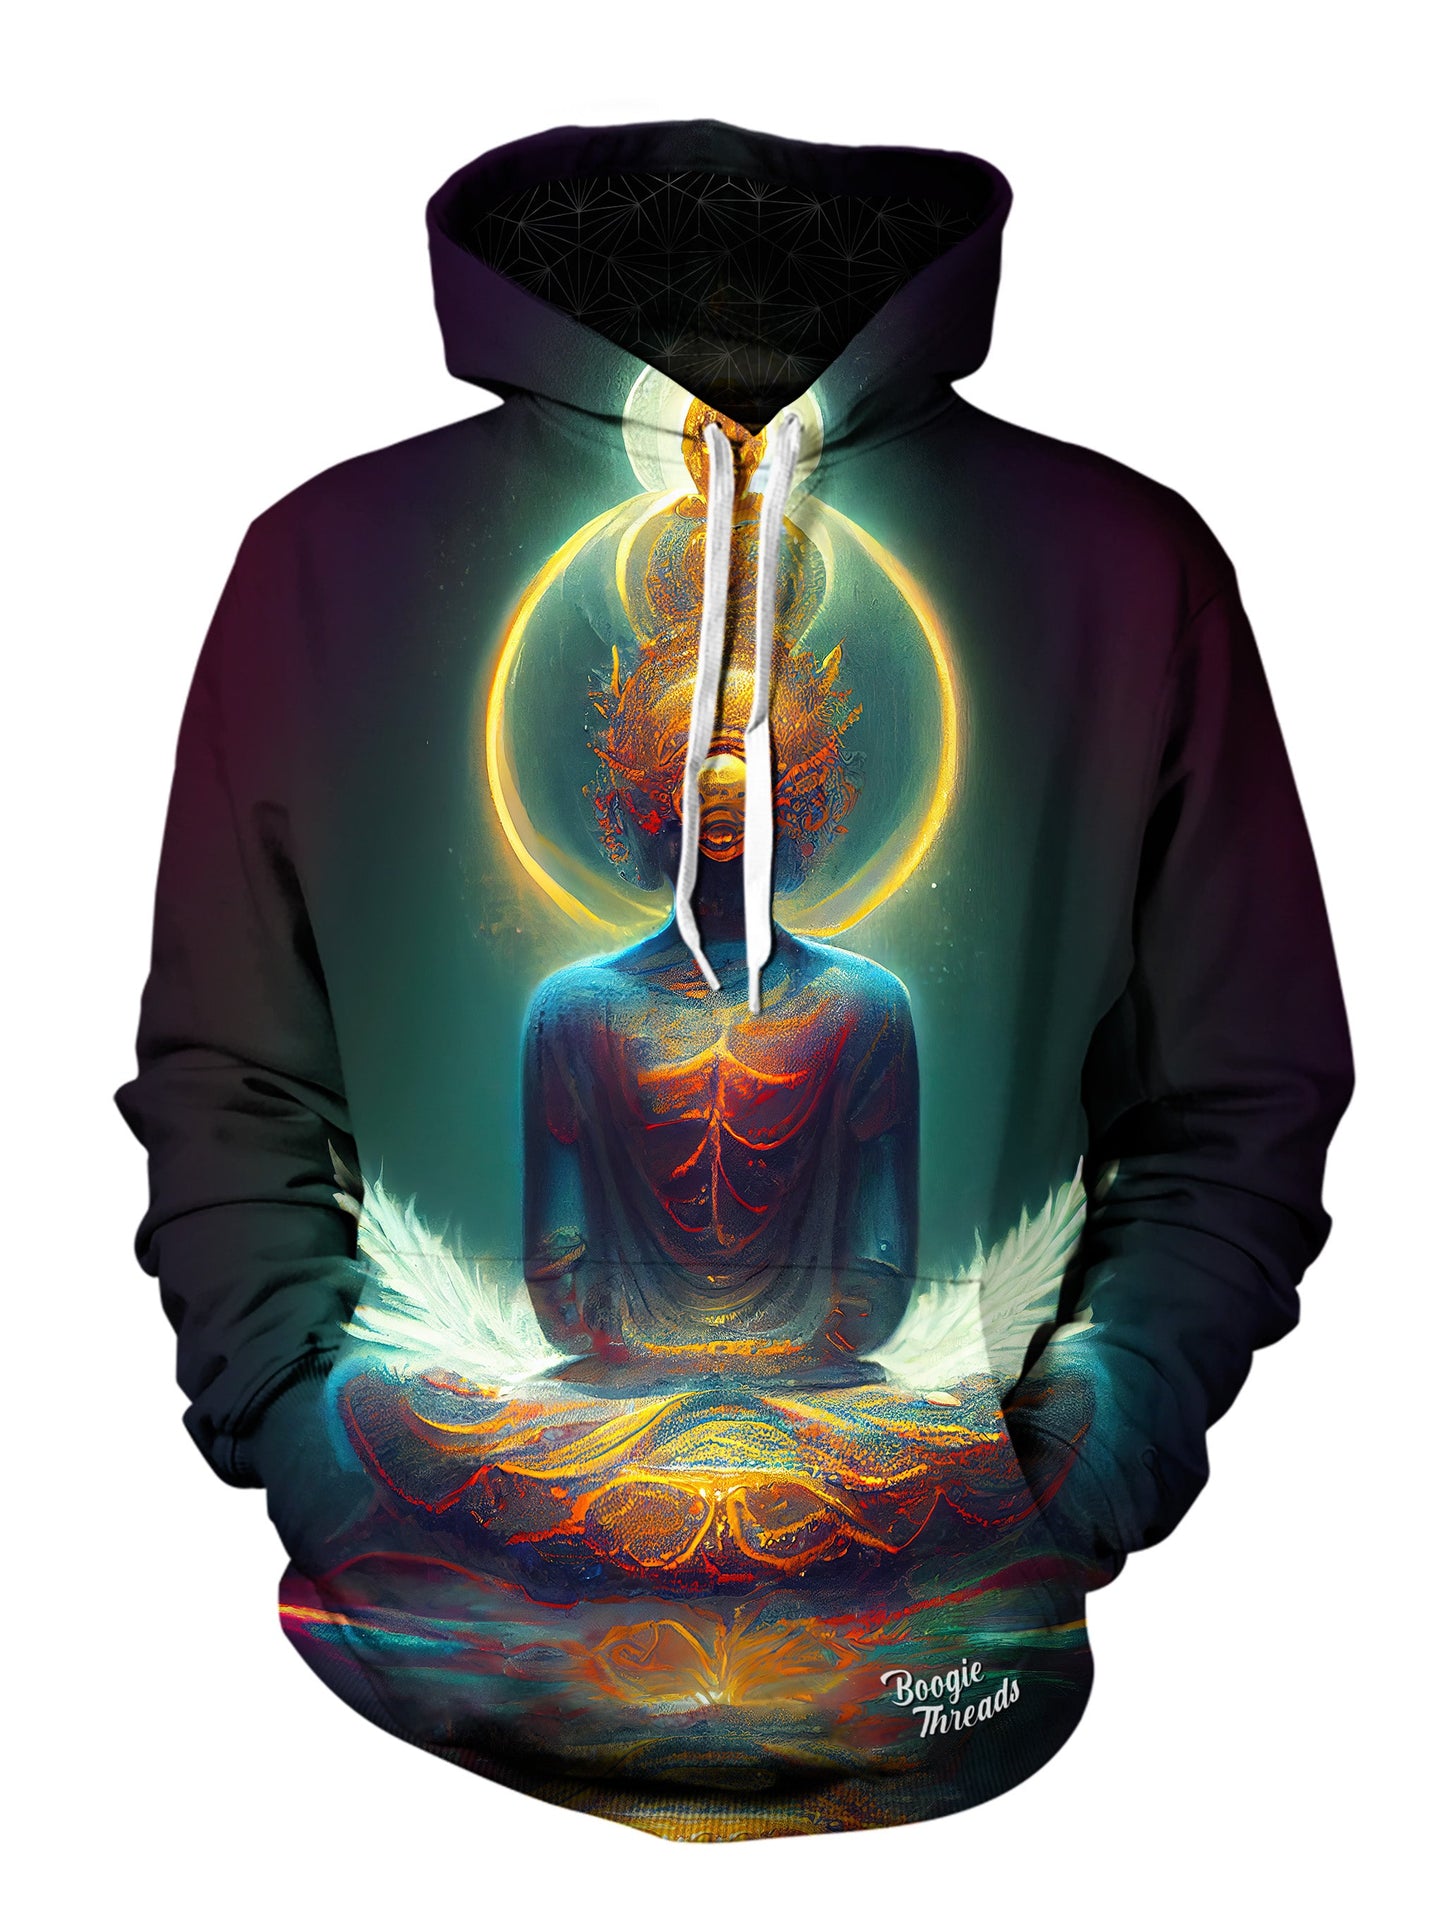 Tawdry Integrity Unisex Pullover Hoodie - EDM Festival Clothing - Boogie Threads